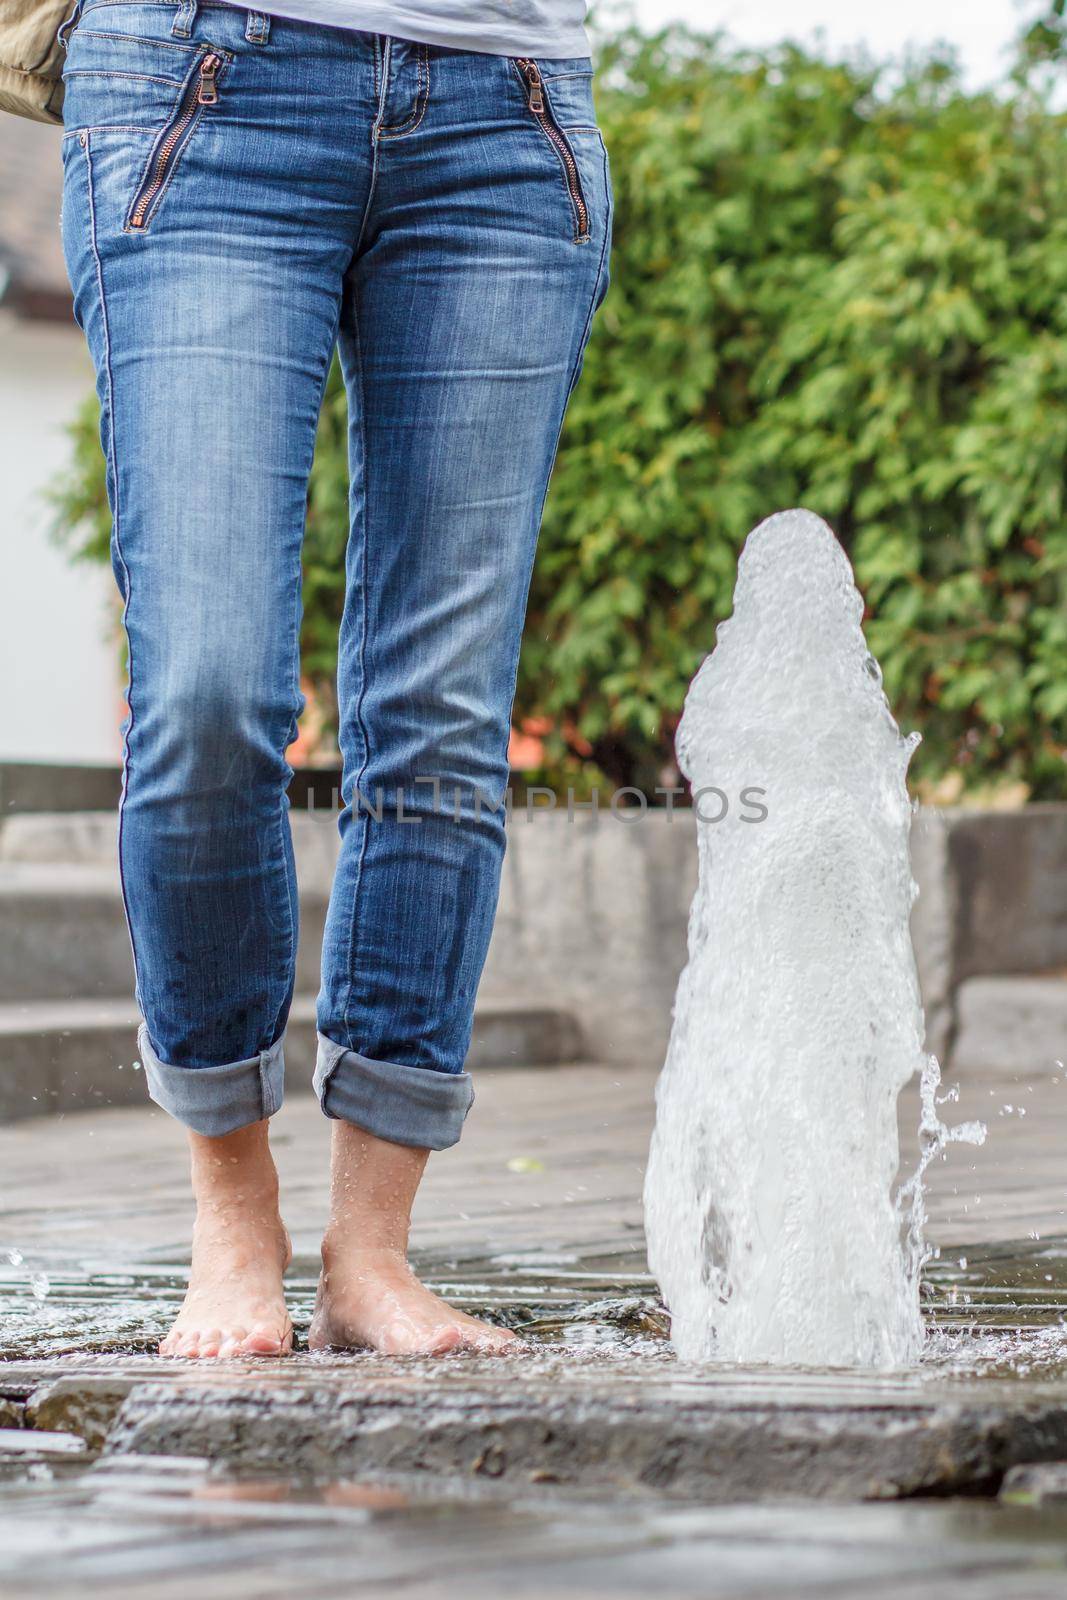 Feet of the lady in jeans with drops of water on them near the fountain in city. Sunny day in summertime